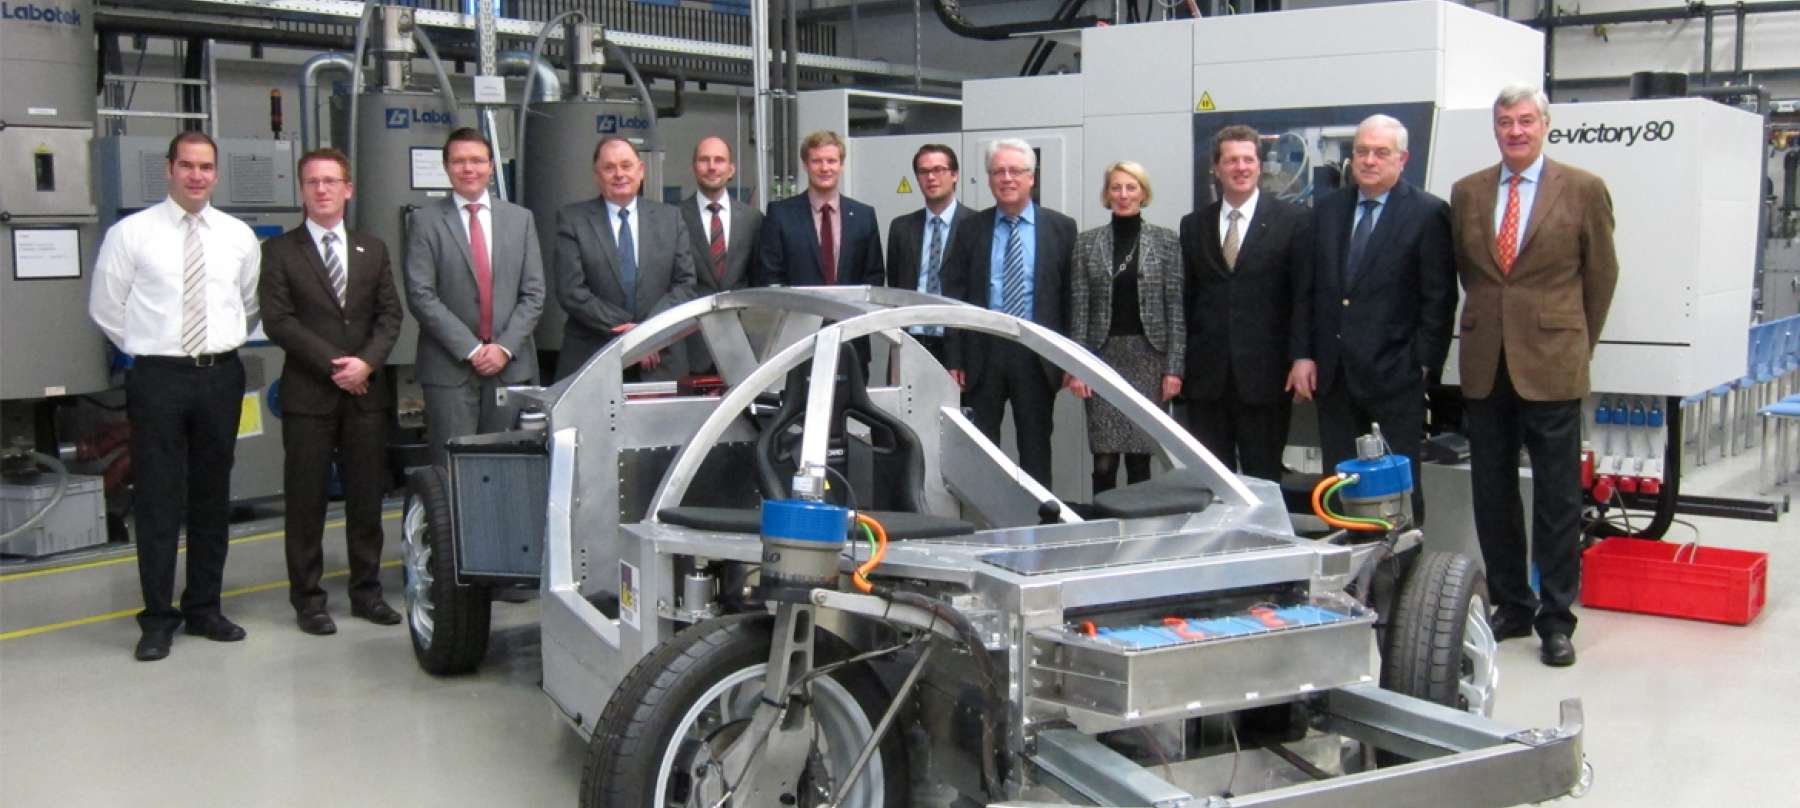 A project of the Institute for Automotive Engineering (ika) at RWTH Aachen University